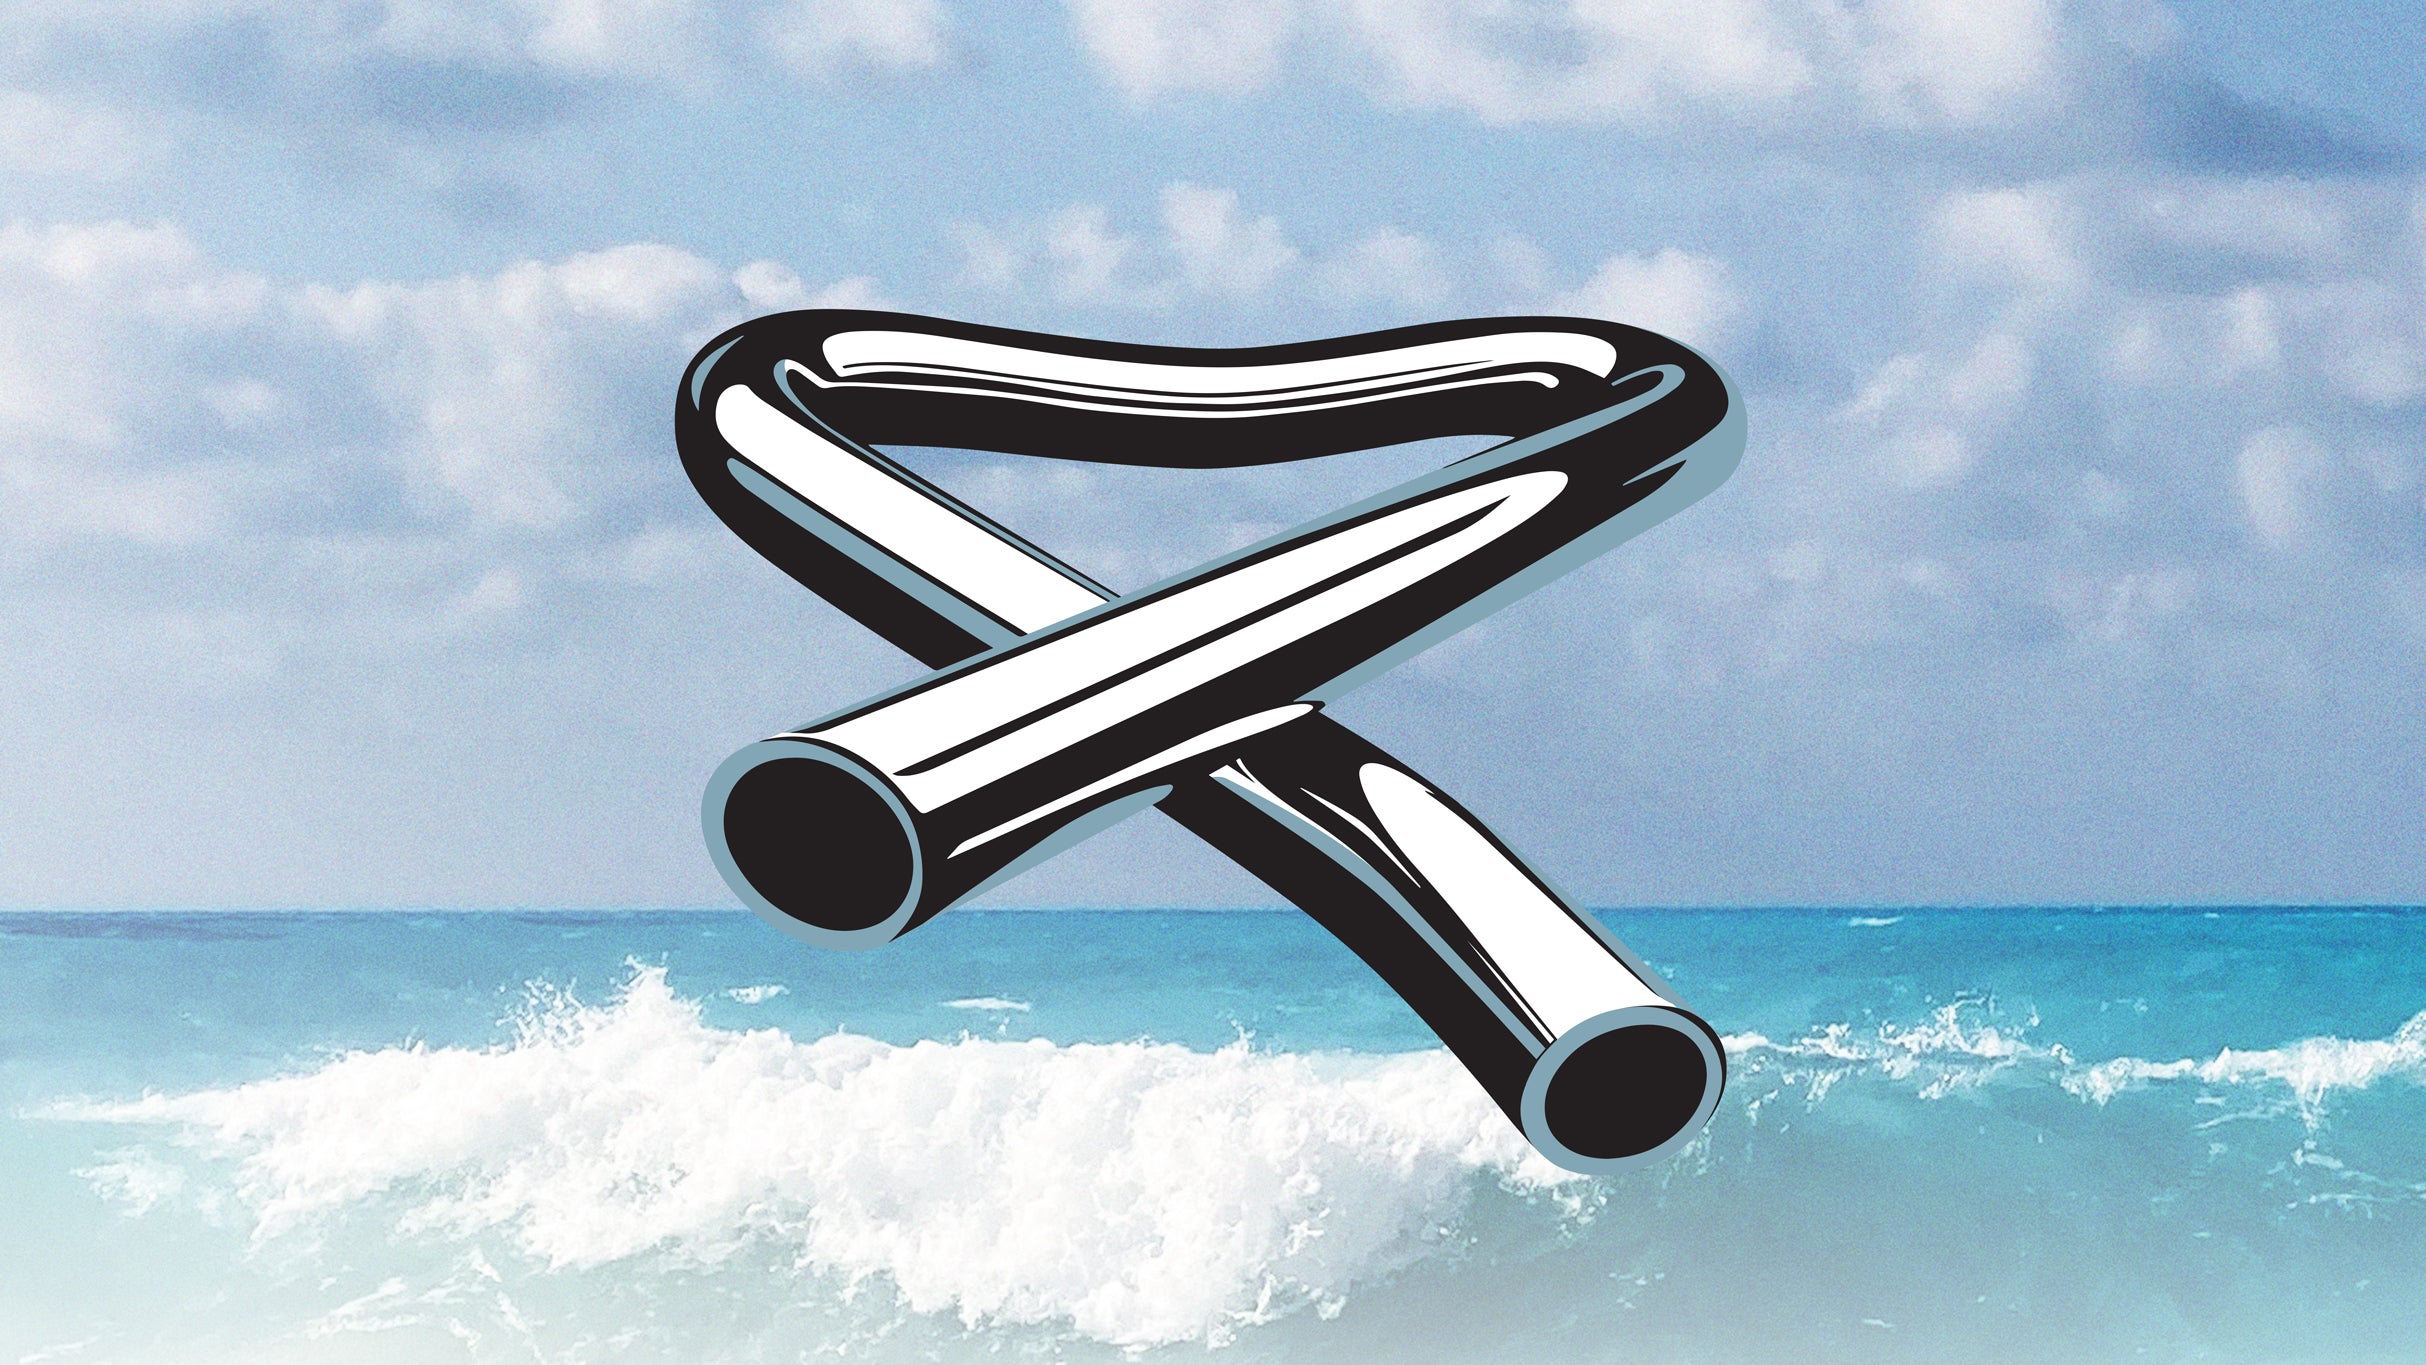 Mike Oldfield's Tubular Bells Live in Concert Gold Anniversary in St Kilda promo photo for Exclusive presale offer code